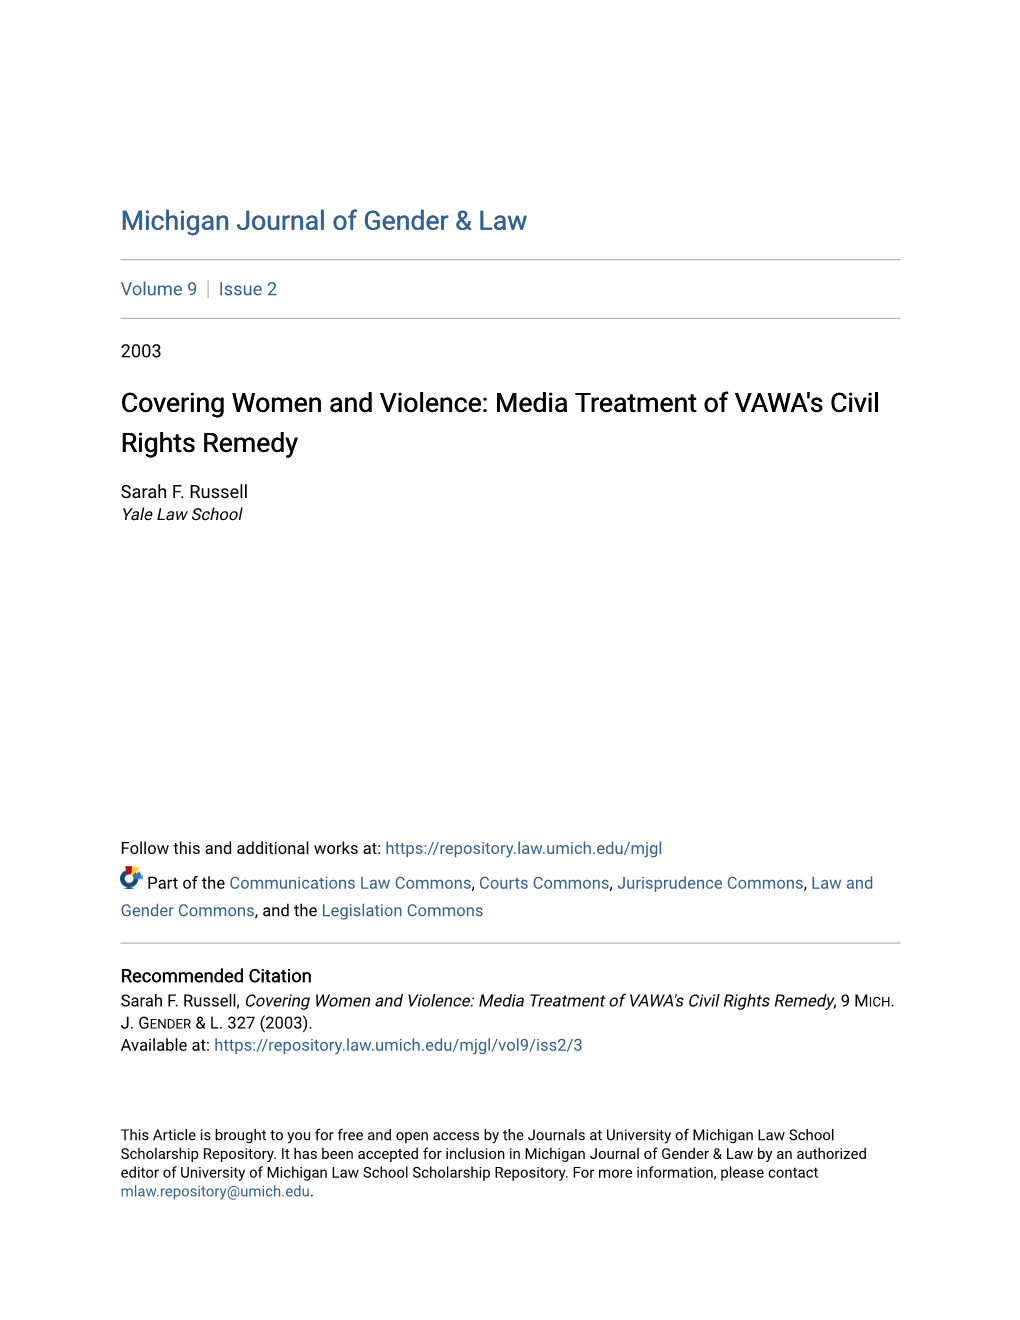 Covering Women and Violence: Media Treatment of VAWA's Civil Rights Remedy